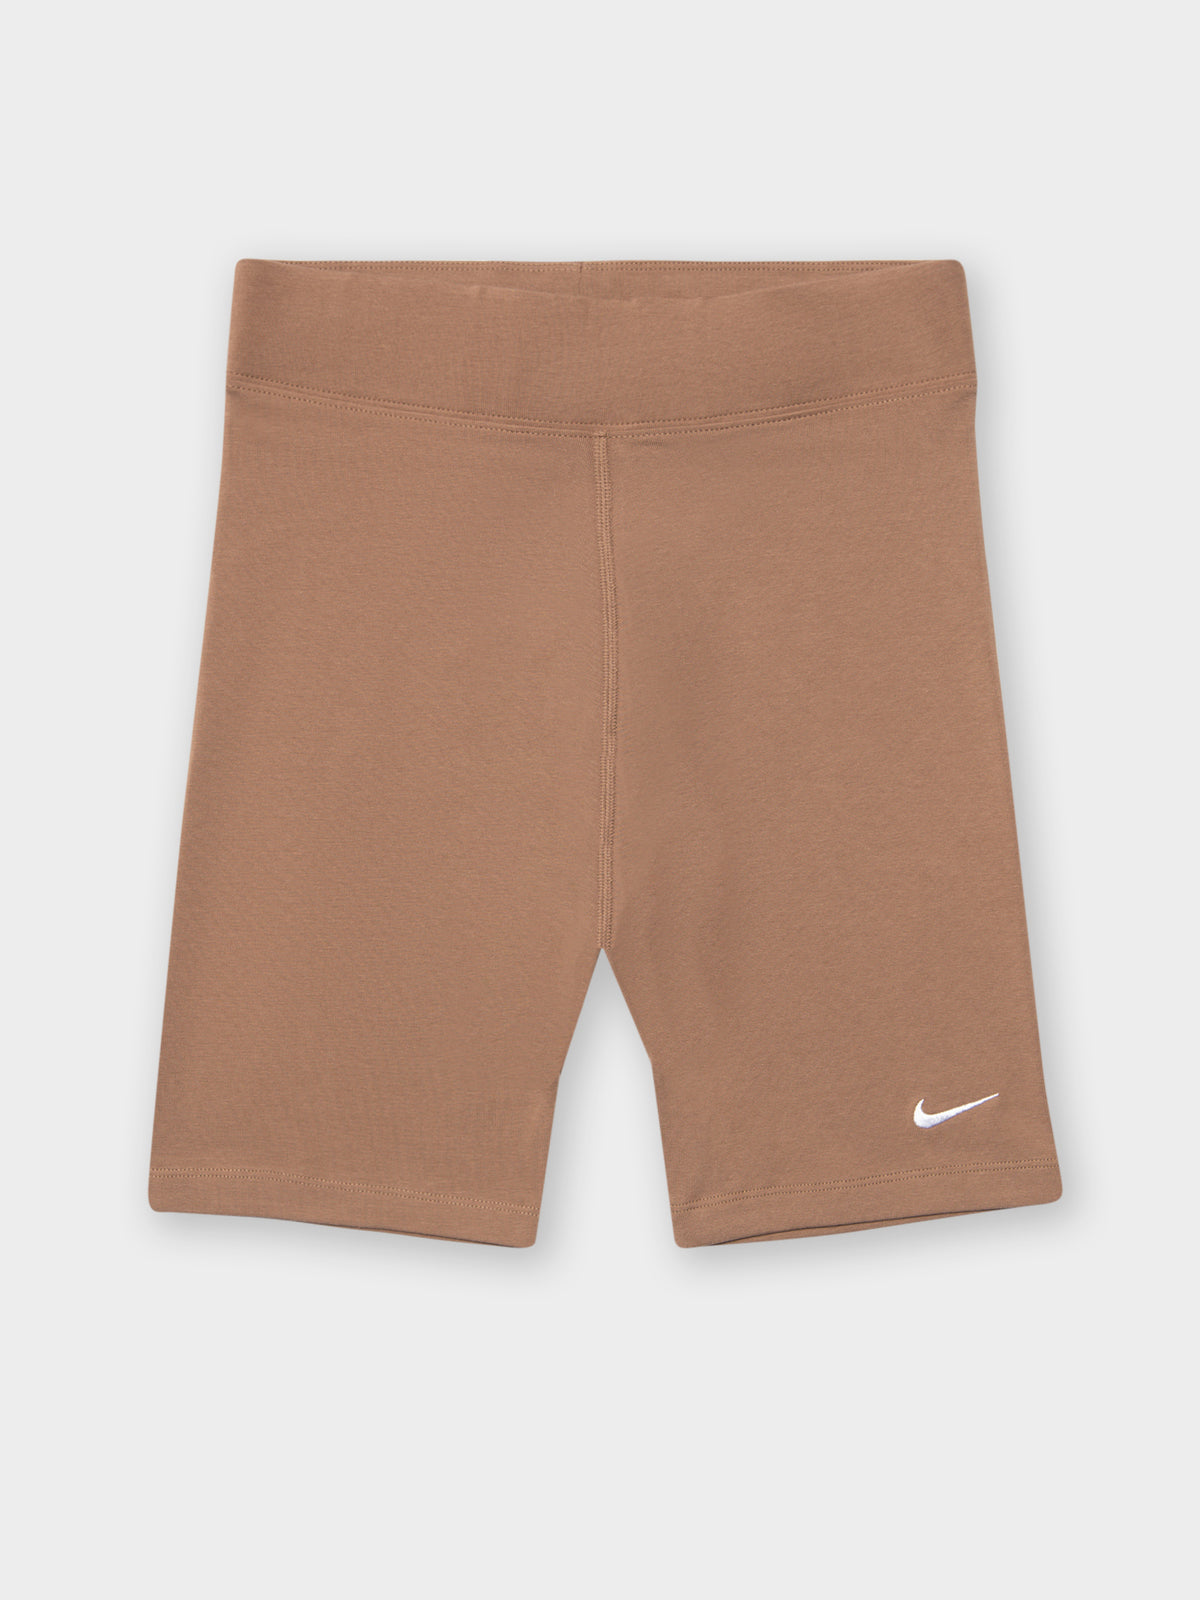 Essential Bike Shorts in Archaeo Brown